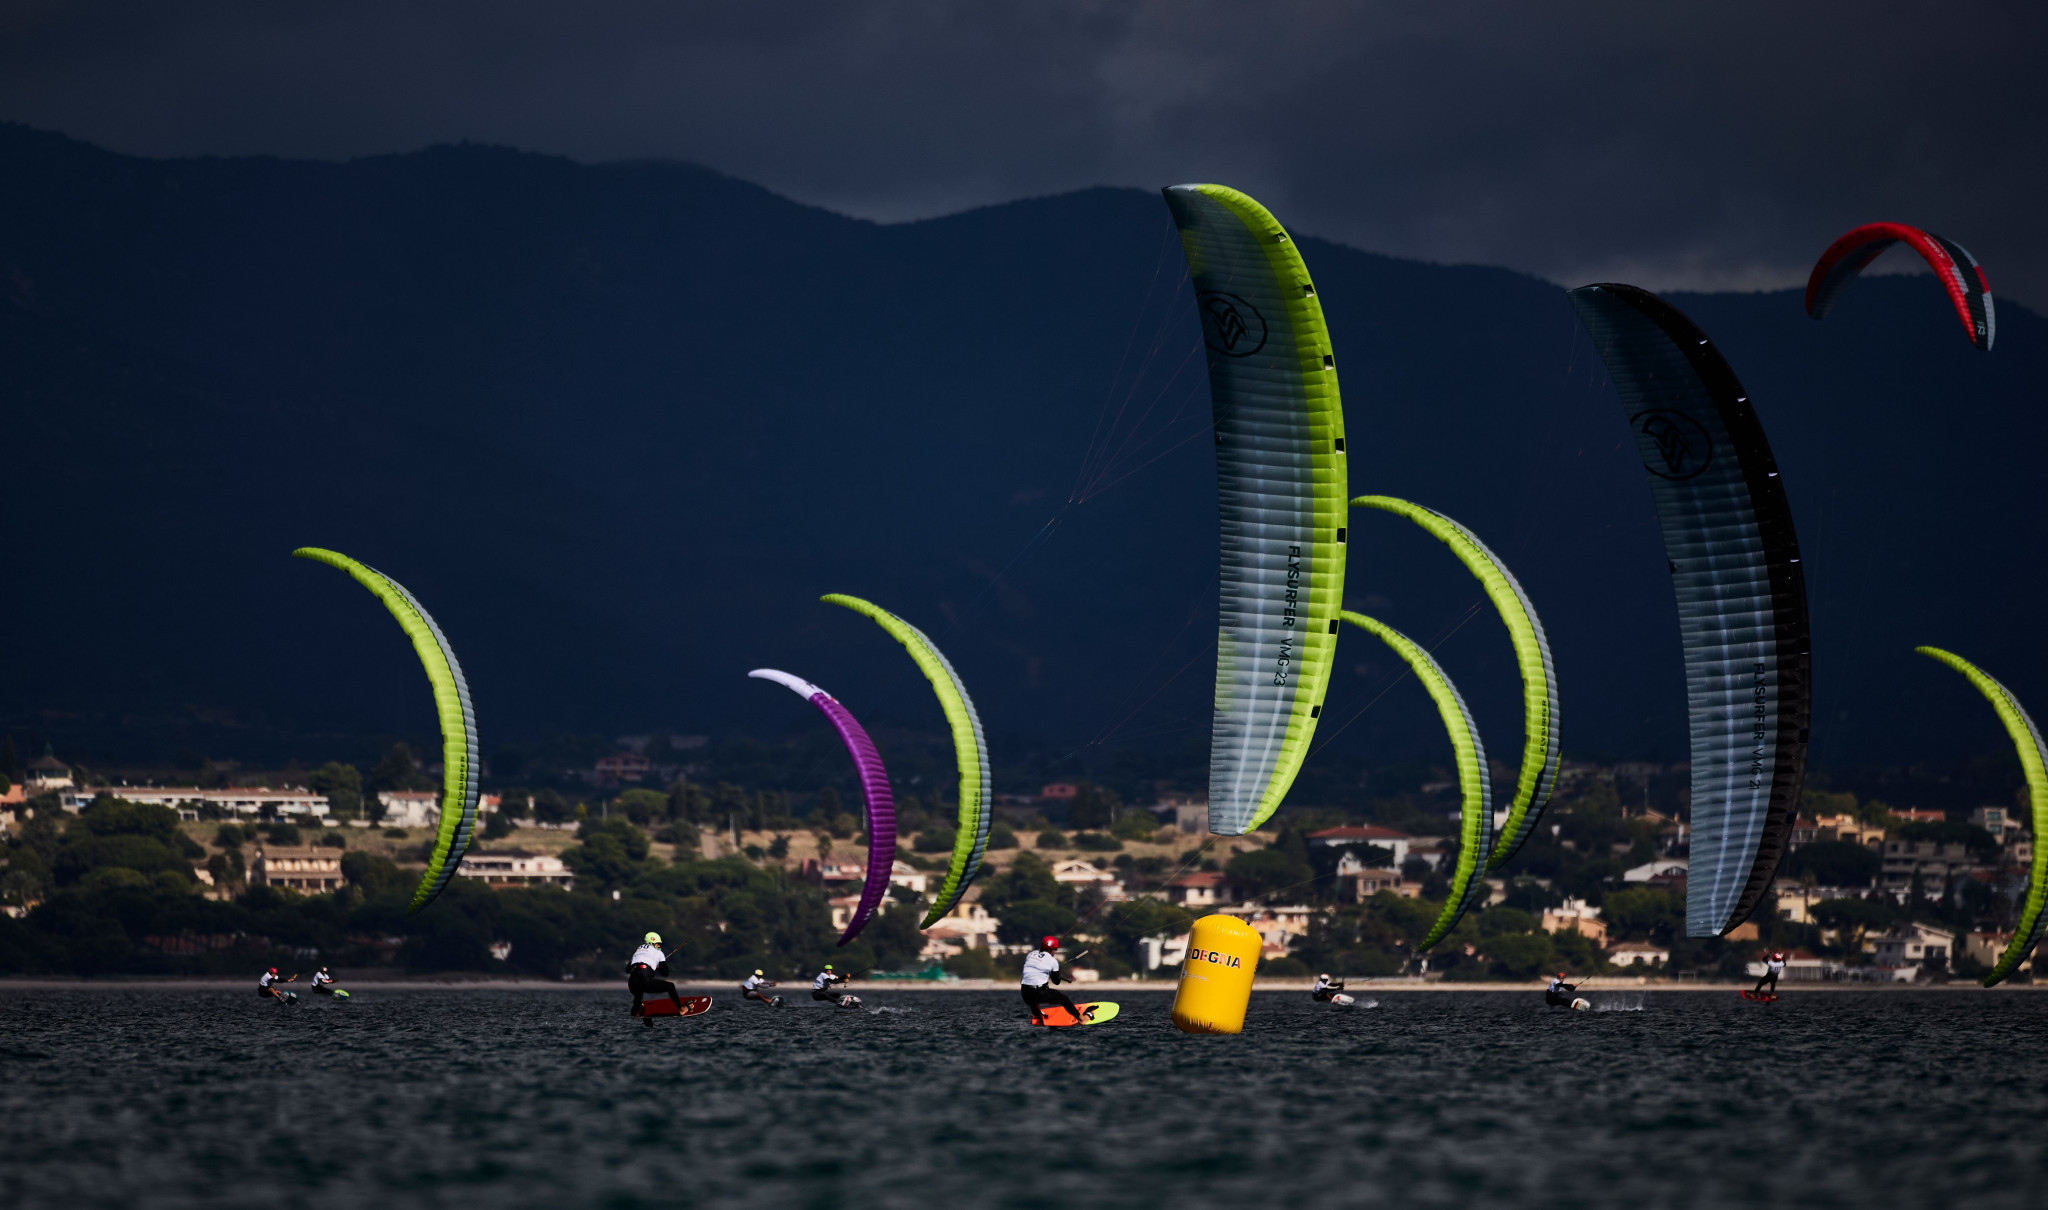 Vodisek and Moroz lead men's and women's standings as racing resumes at Formula Kite World Championships